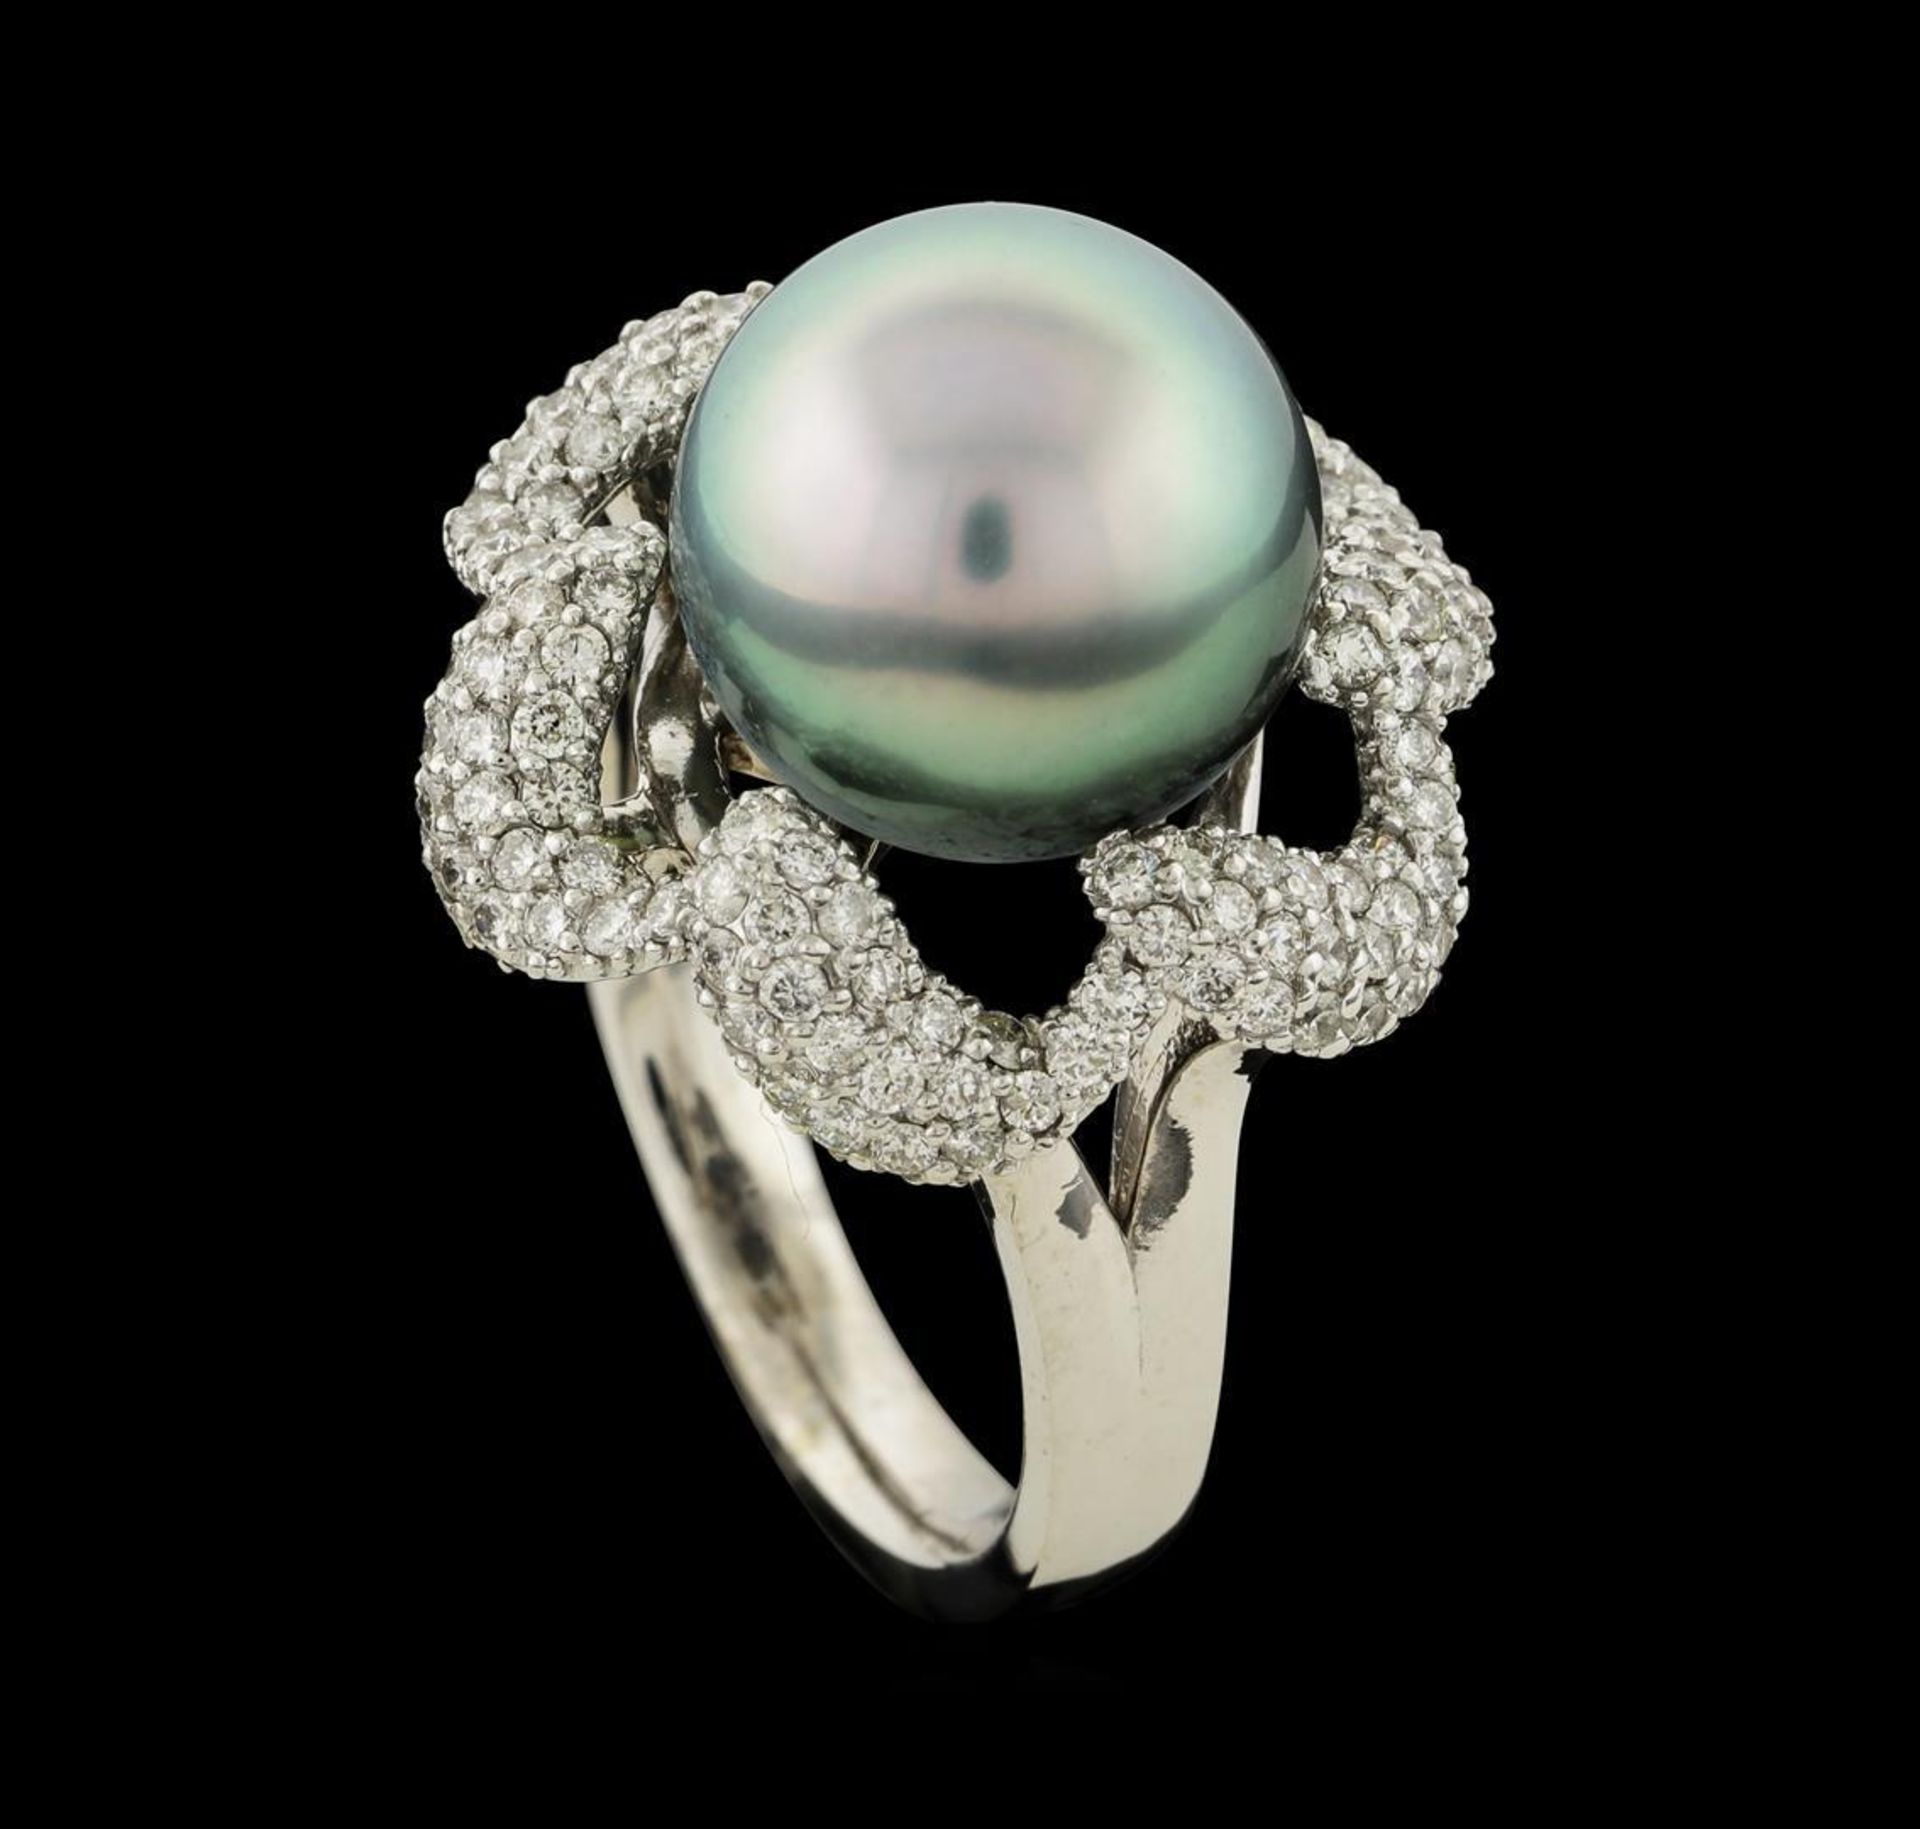 Pearl and Diamond Ring - 14KT White Gold - Image 4 of 5